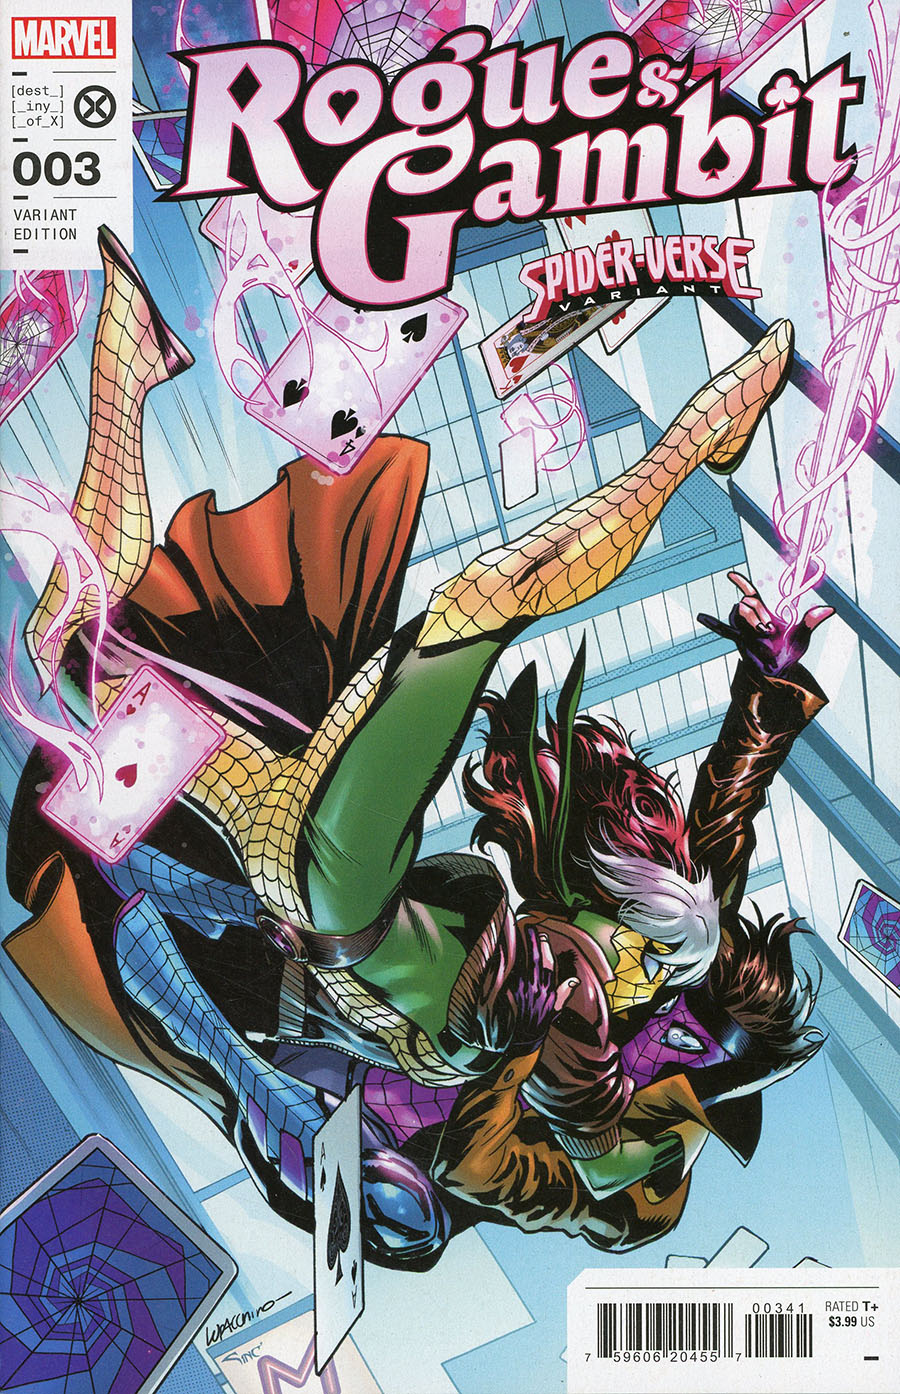 Rogue & Gambit Vol 2 #3 Cover B Variant Emanuela Lupacchino Spider-Verse Cover